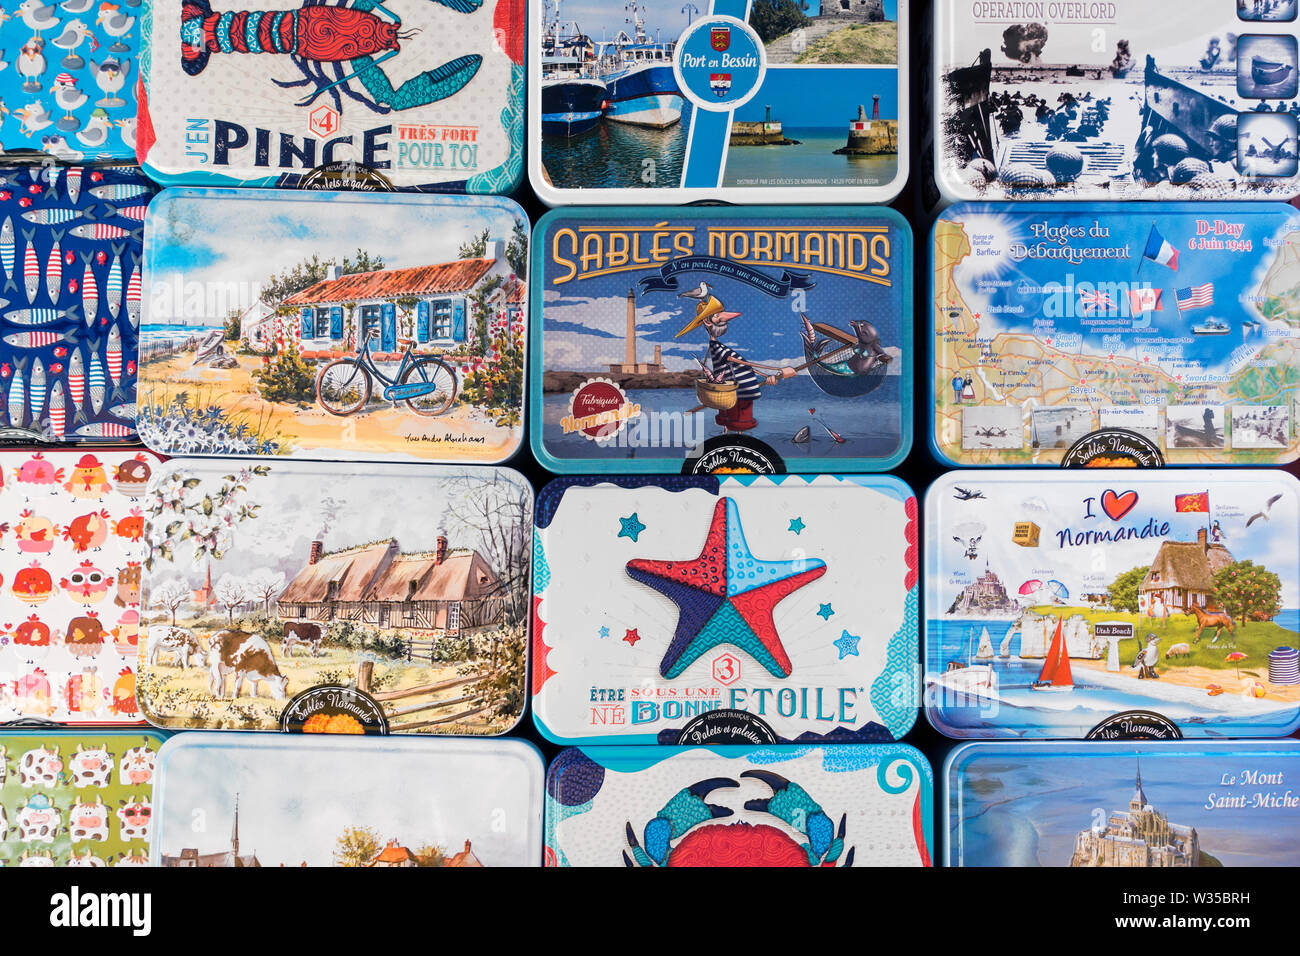 Metal boxes with sablés, French round shortbread cookies as souvenirs on display in souvenir shop at seaside resort Port-en-Bessin, Normandy, France Stock Photo